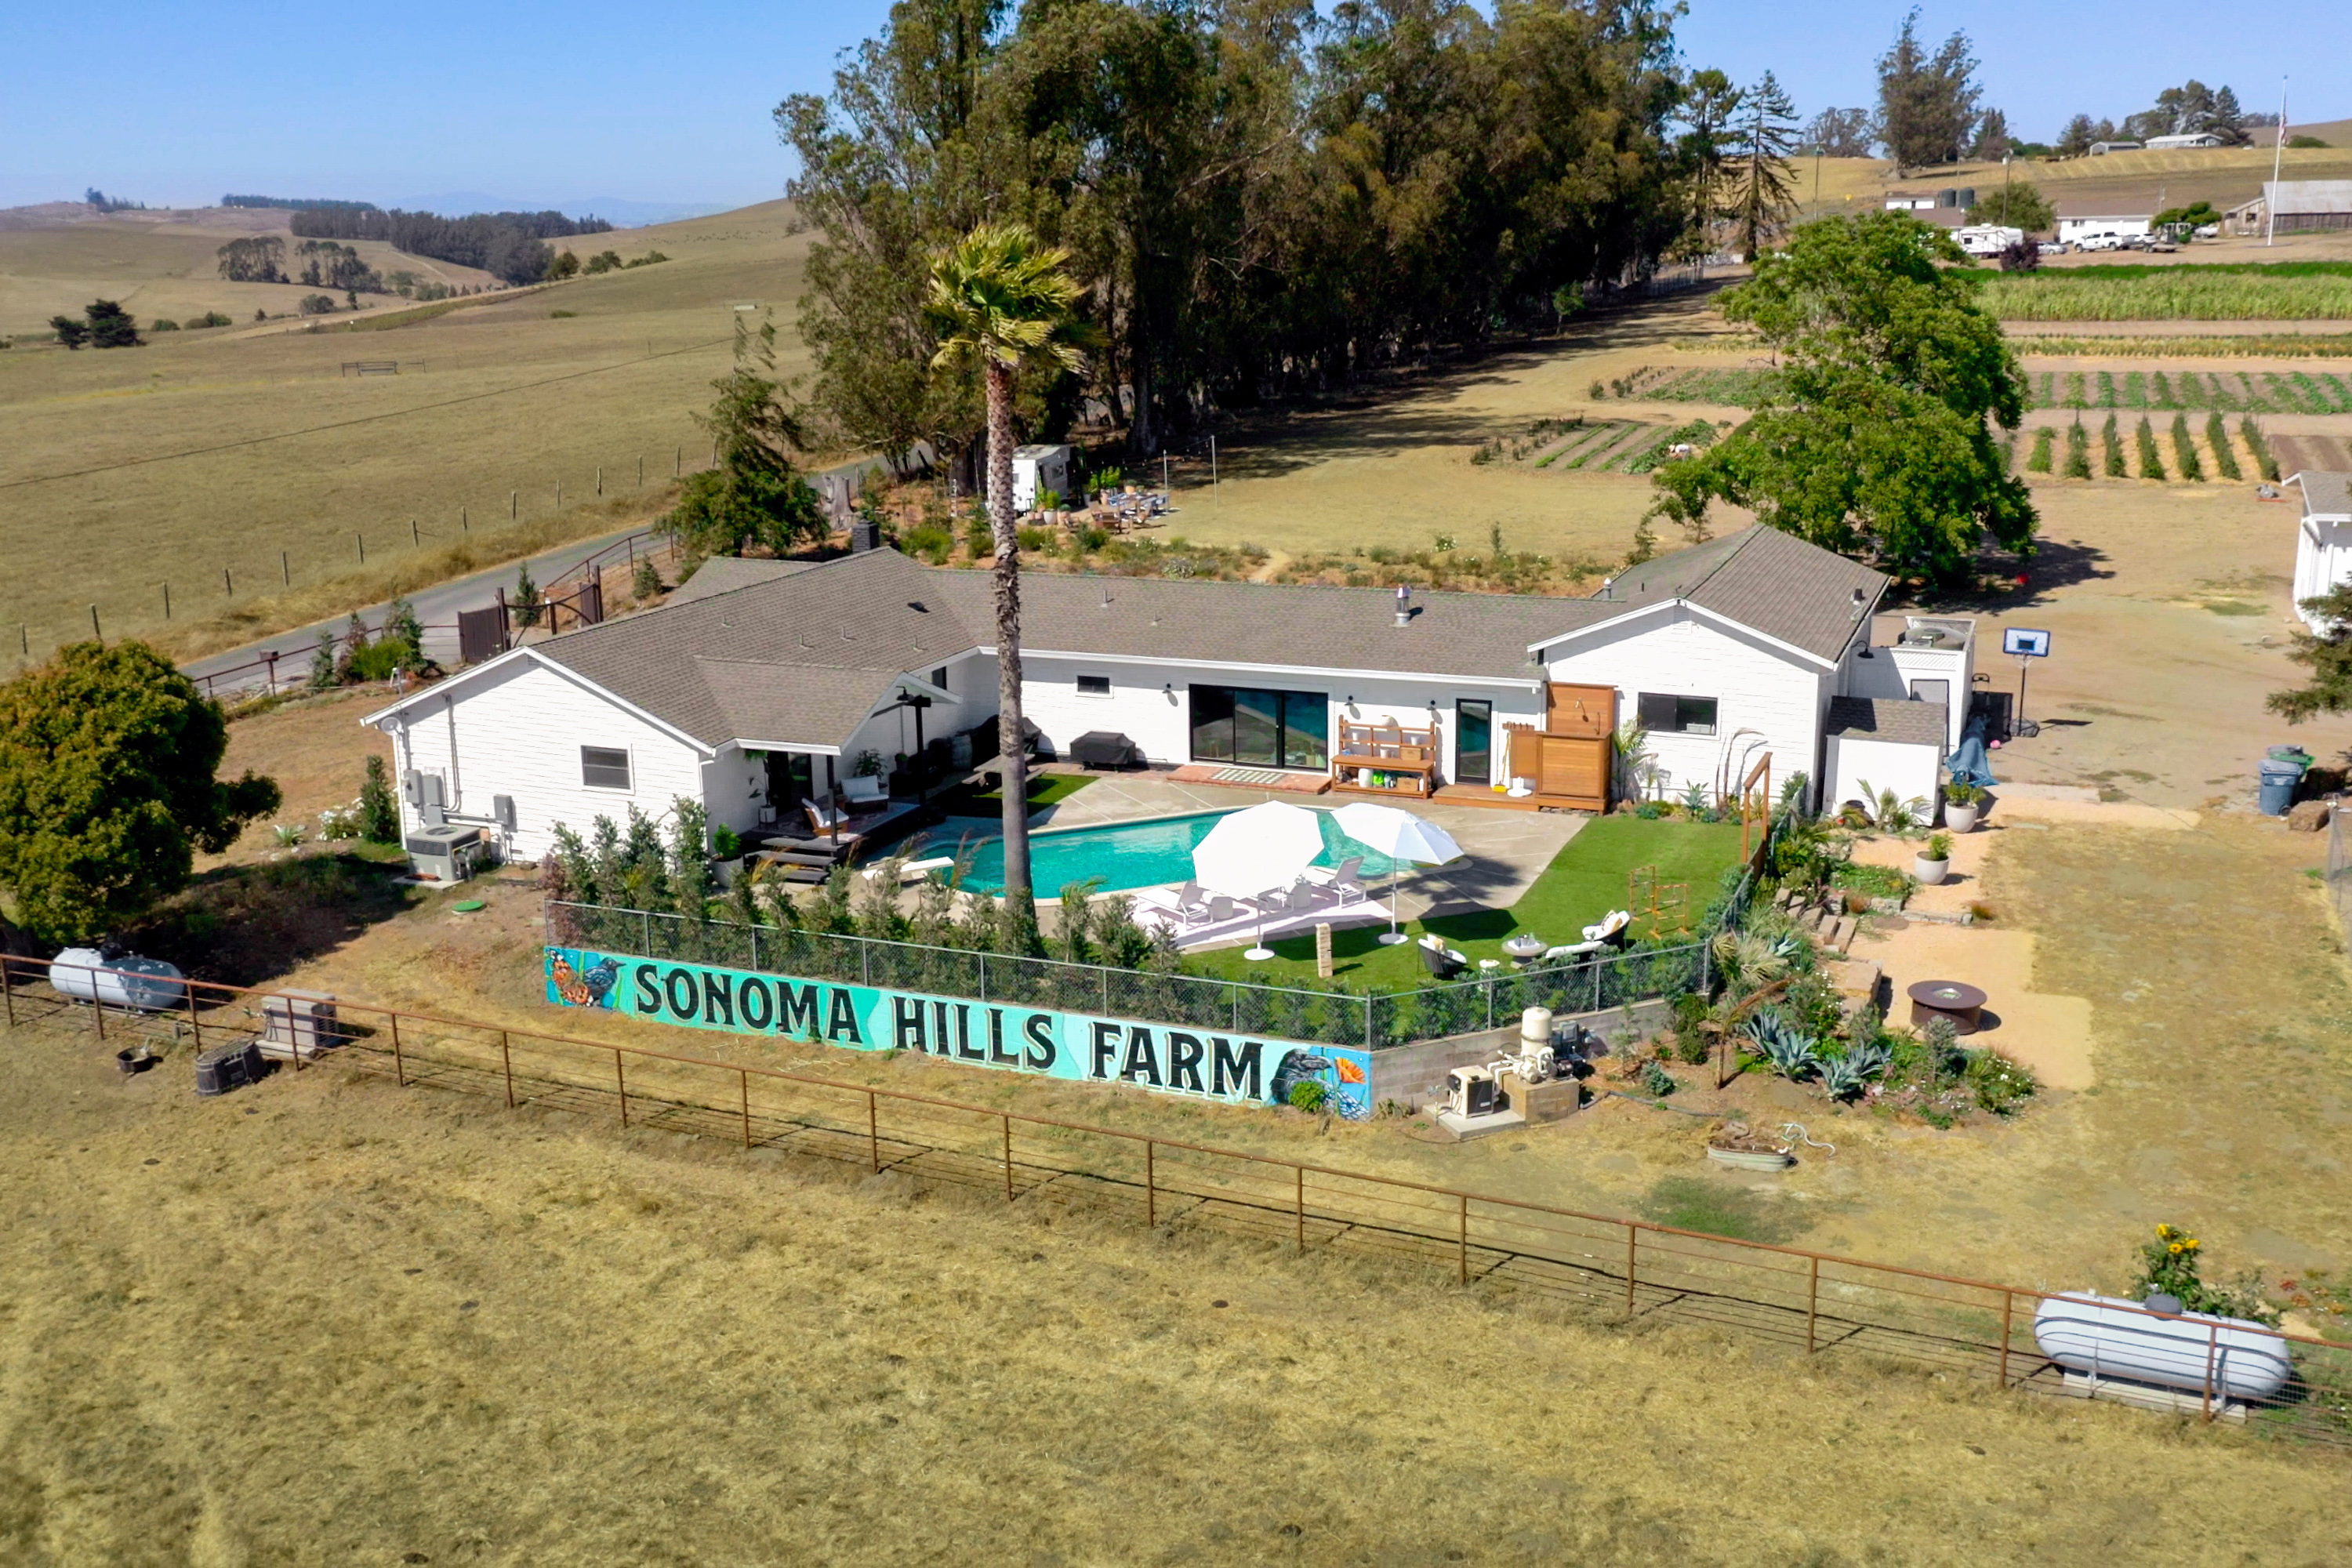 Live the high life with a cannabis-infused stay at Sonoma Hills Farm